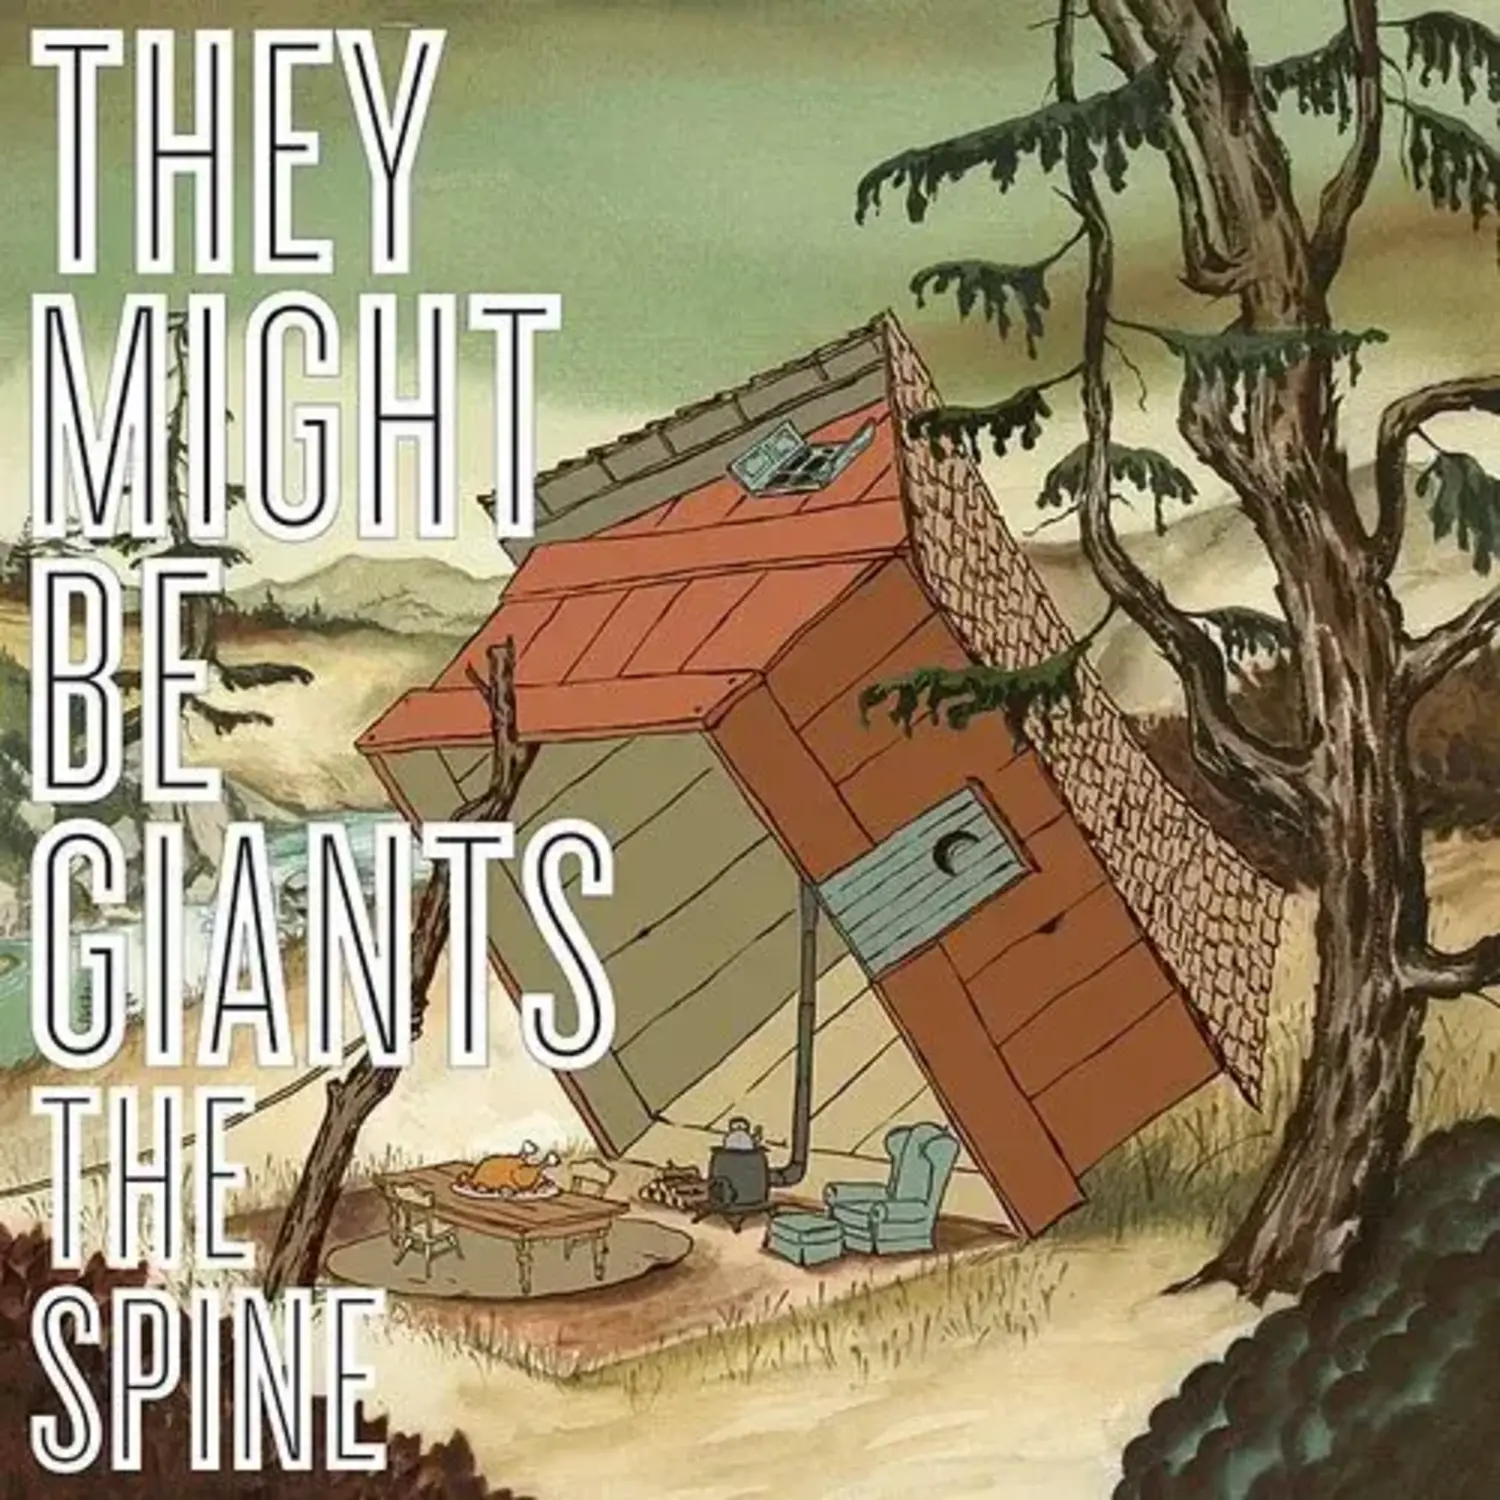 They might be Giants?